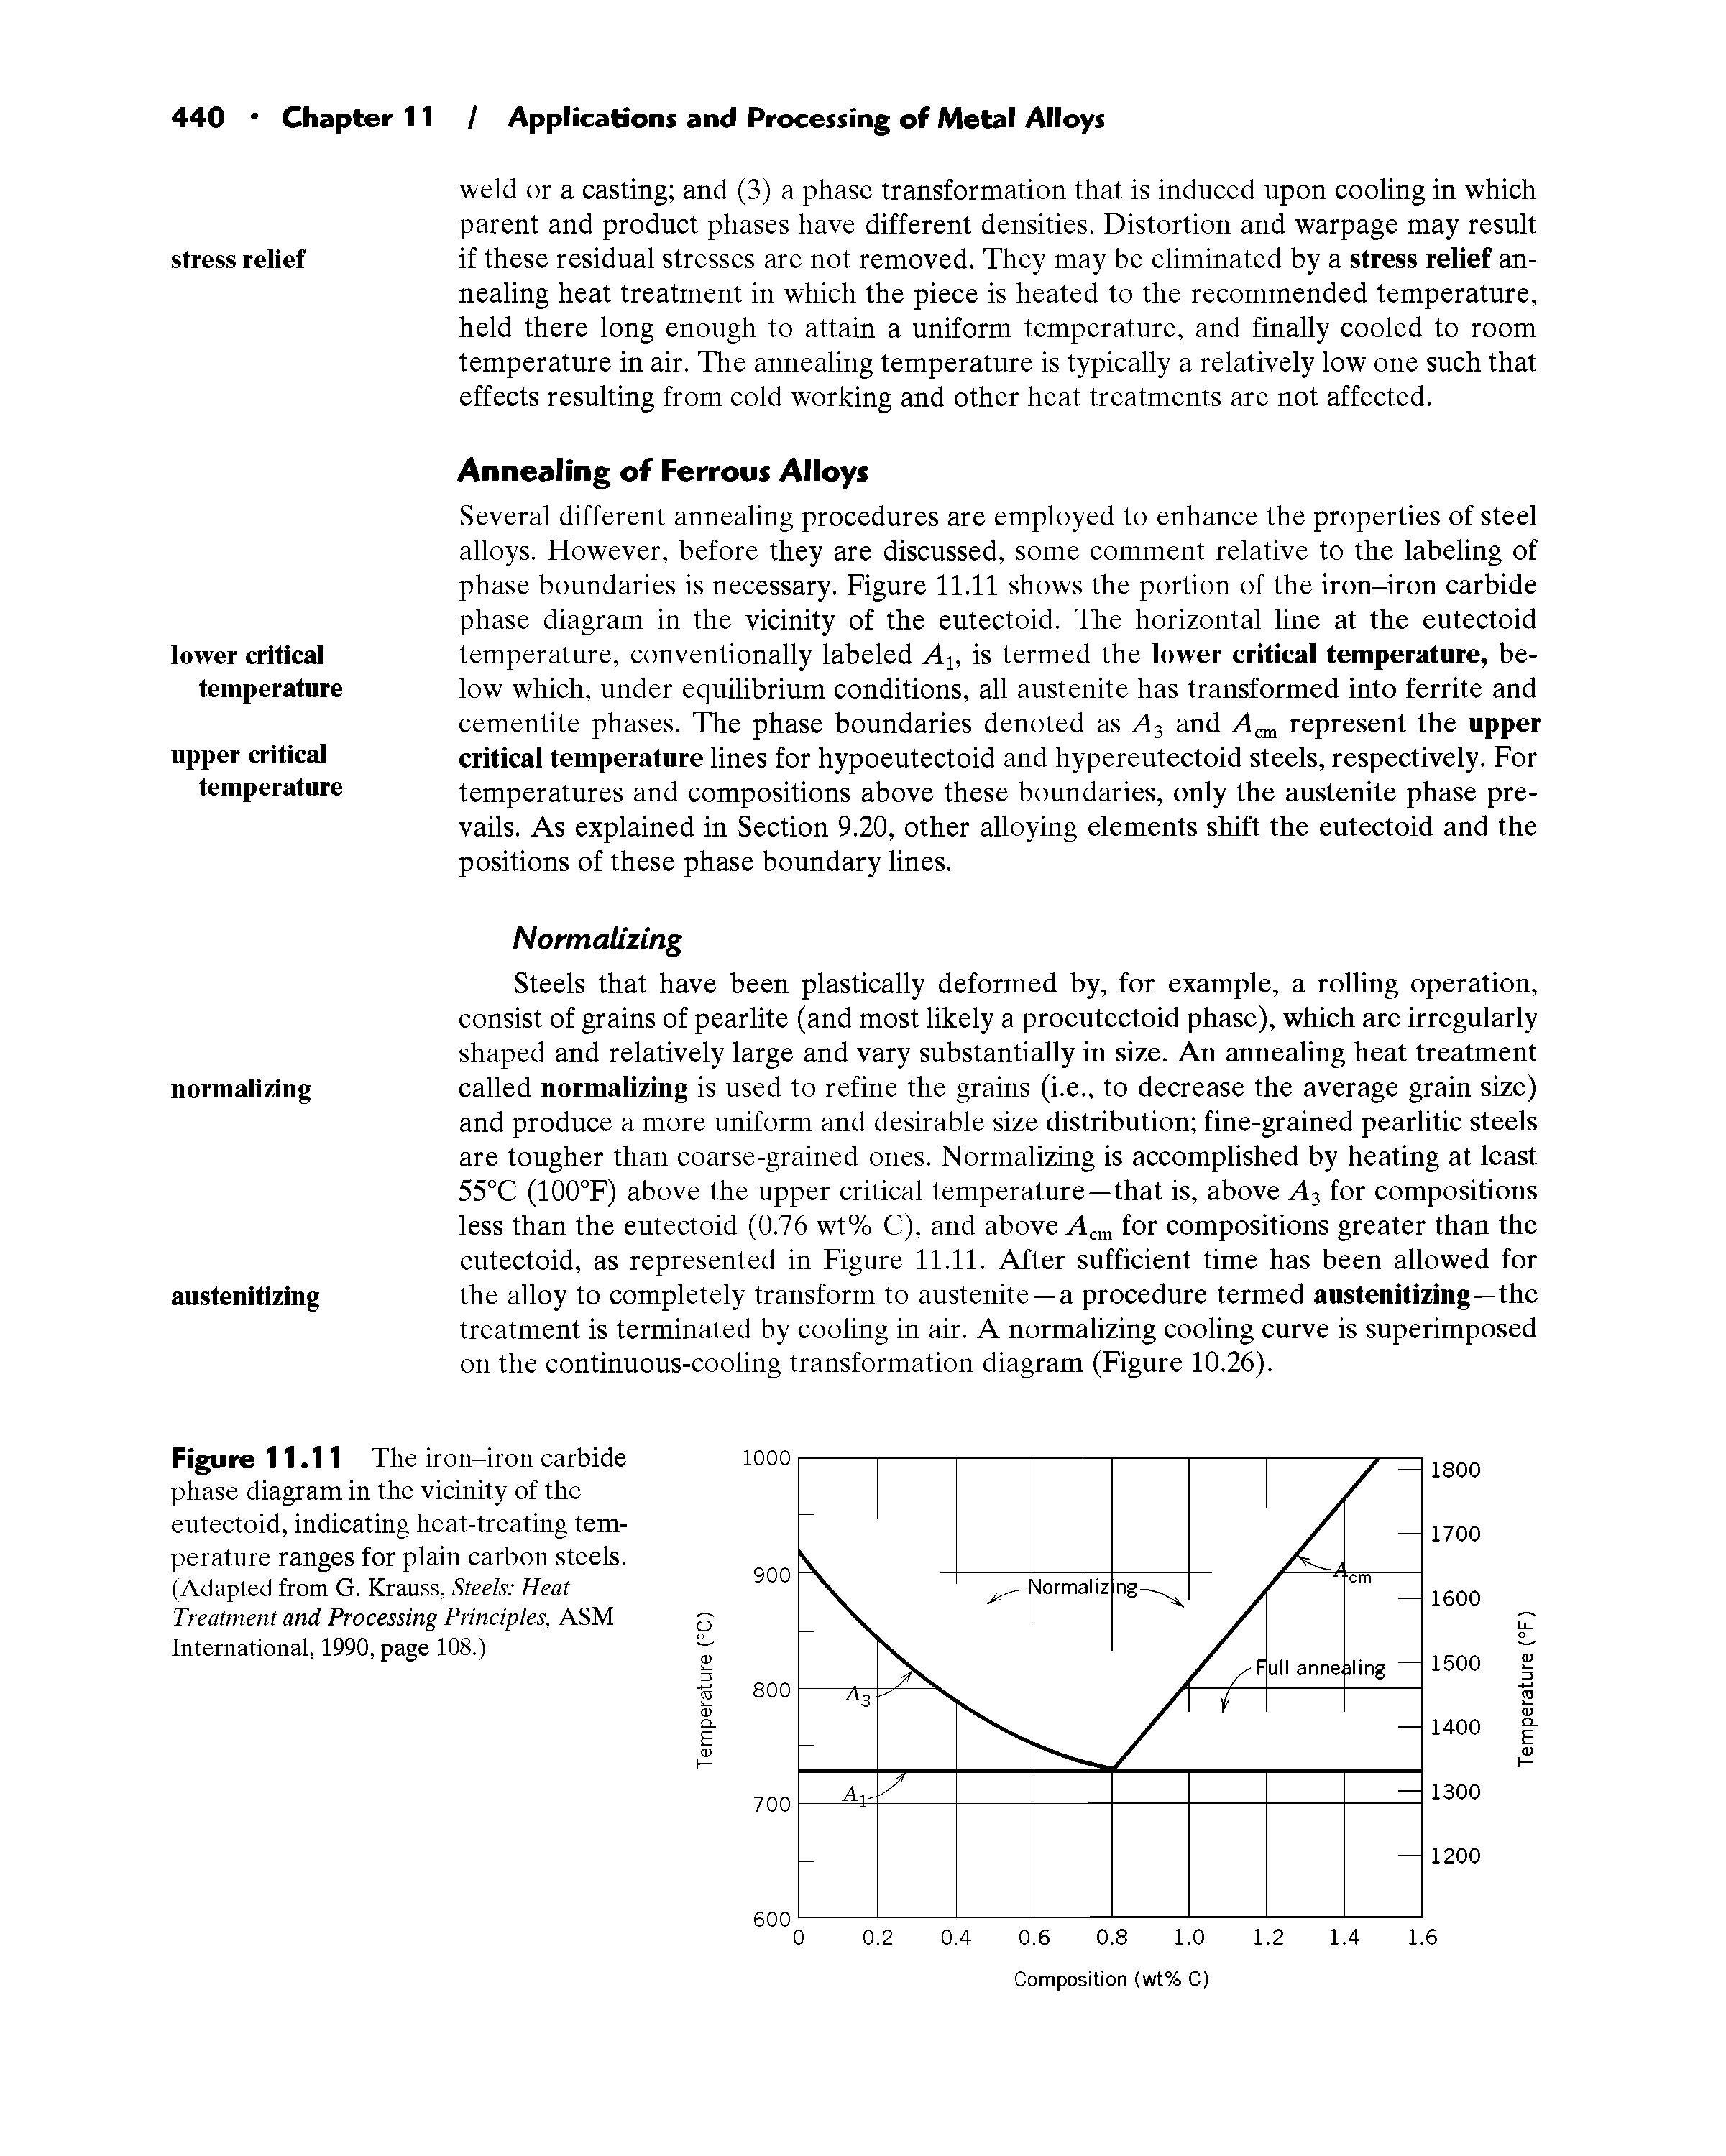 Figure 11.11 The iron-iron carbide phase diagram in the vidnity of the entectoid, indicating heat-treating tem-peratnre ranges for plain carbon steels. (Adapted from G. Krauss, Steels Heat Treatment and Processing Principles, ASM International, 1990, page 108.)...